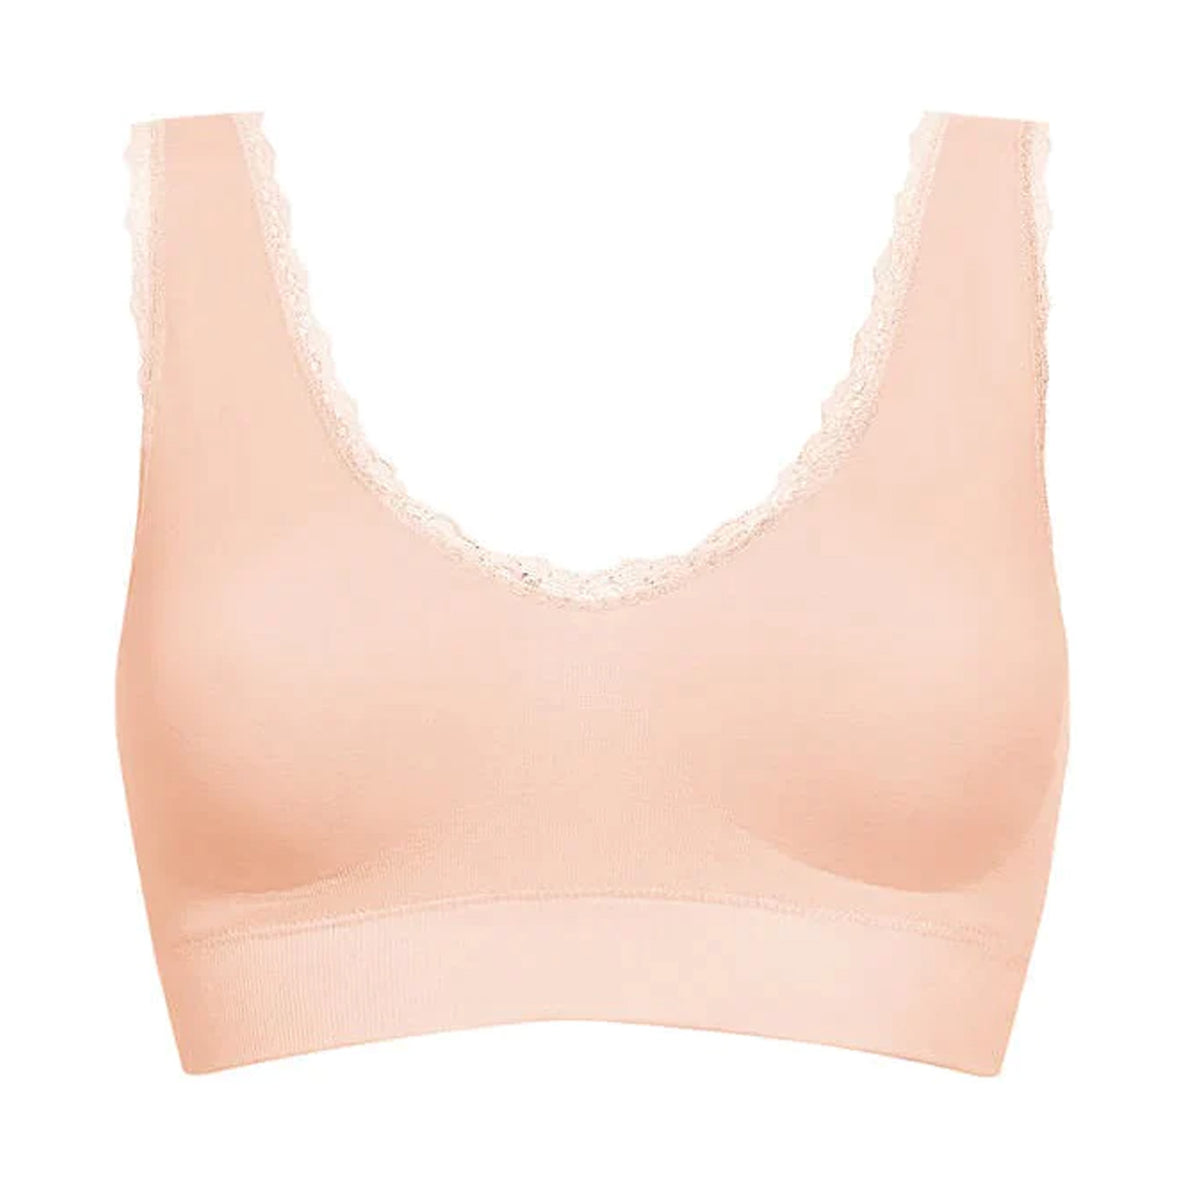 Kitty Seamless Wireless Bra - Rose Nude front view product image